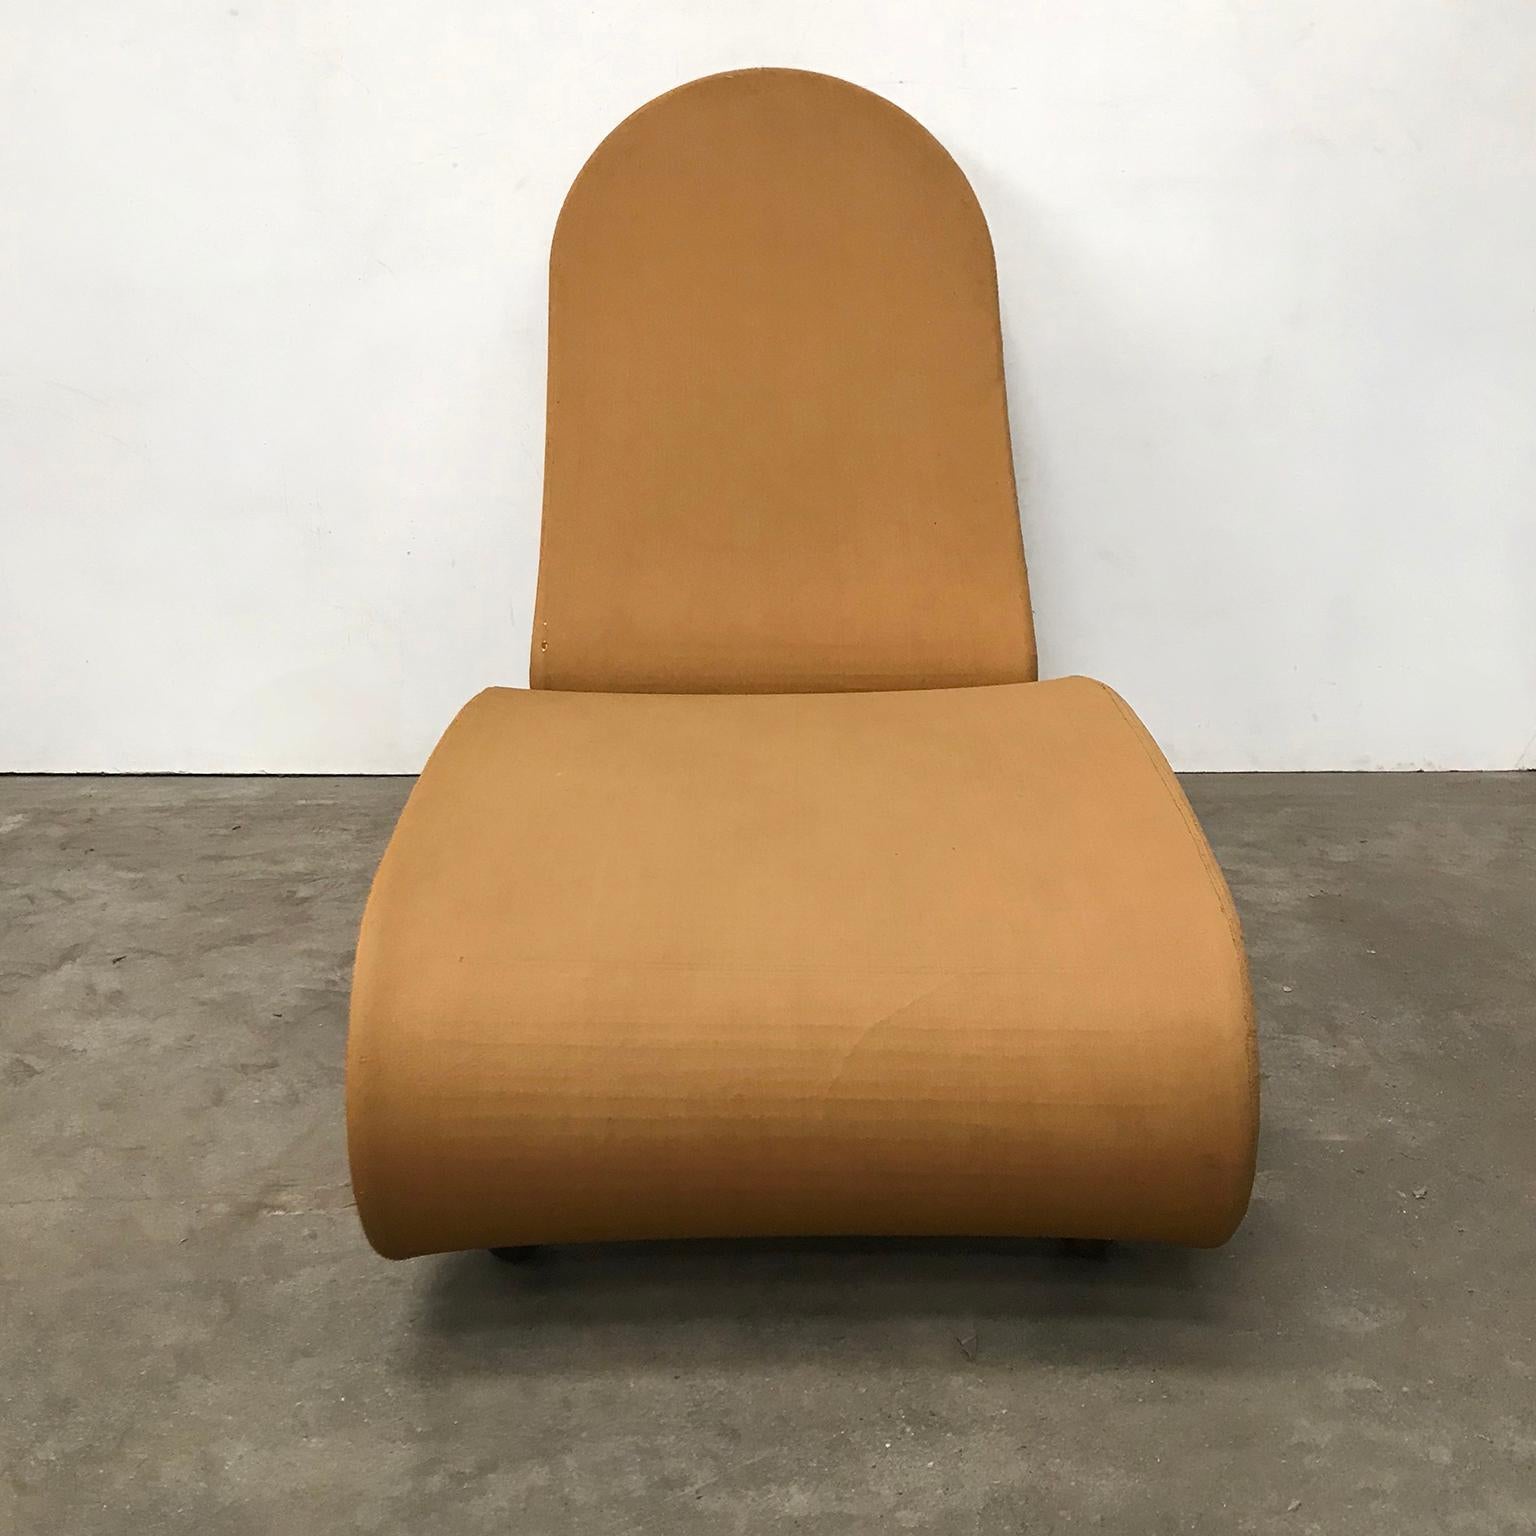 1973, Verner Panton for Rosenthal, 1-2-3 Serie, Rare Chaise Longue, Ochre Fabric For Sale 3